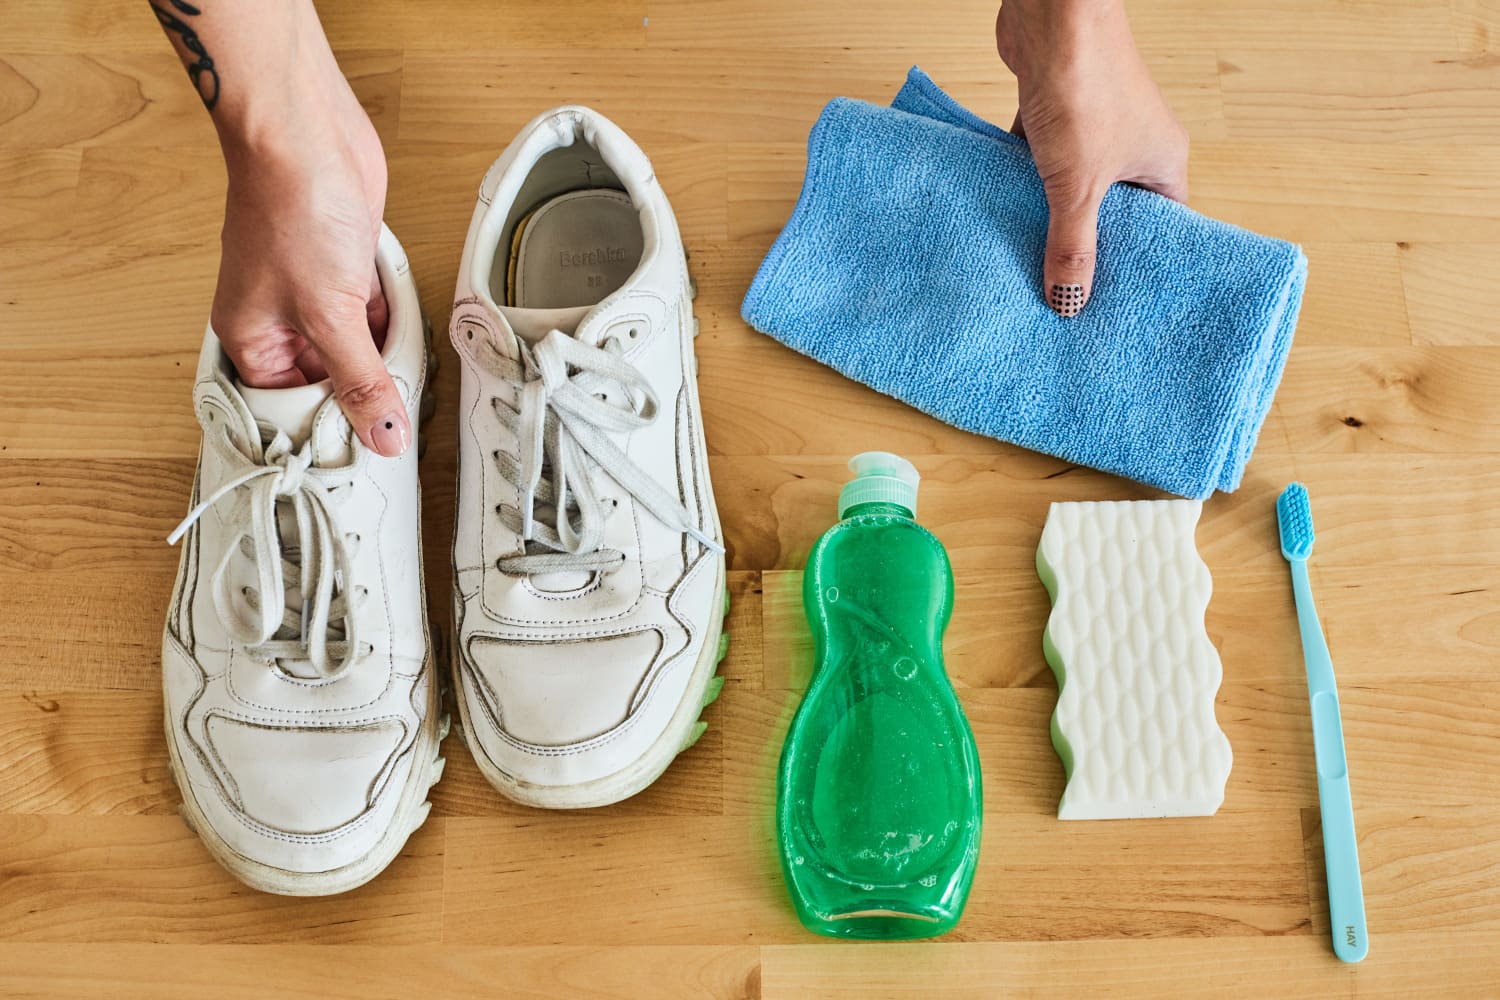 What Homemade Mix Should I Use To Clean My Shoes?